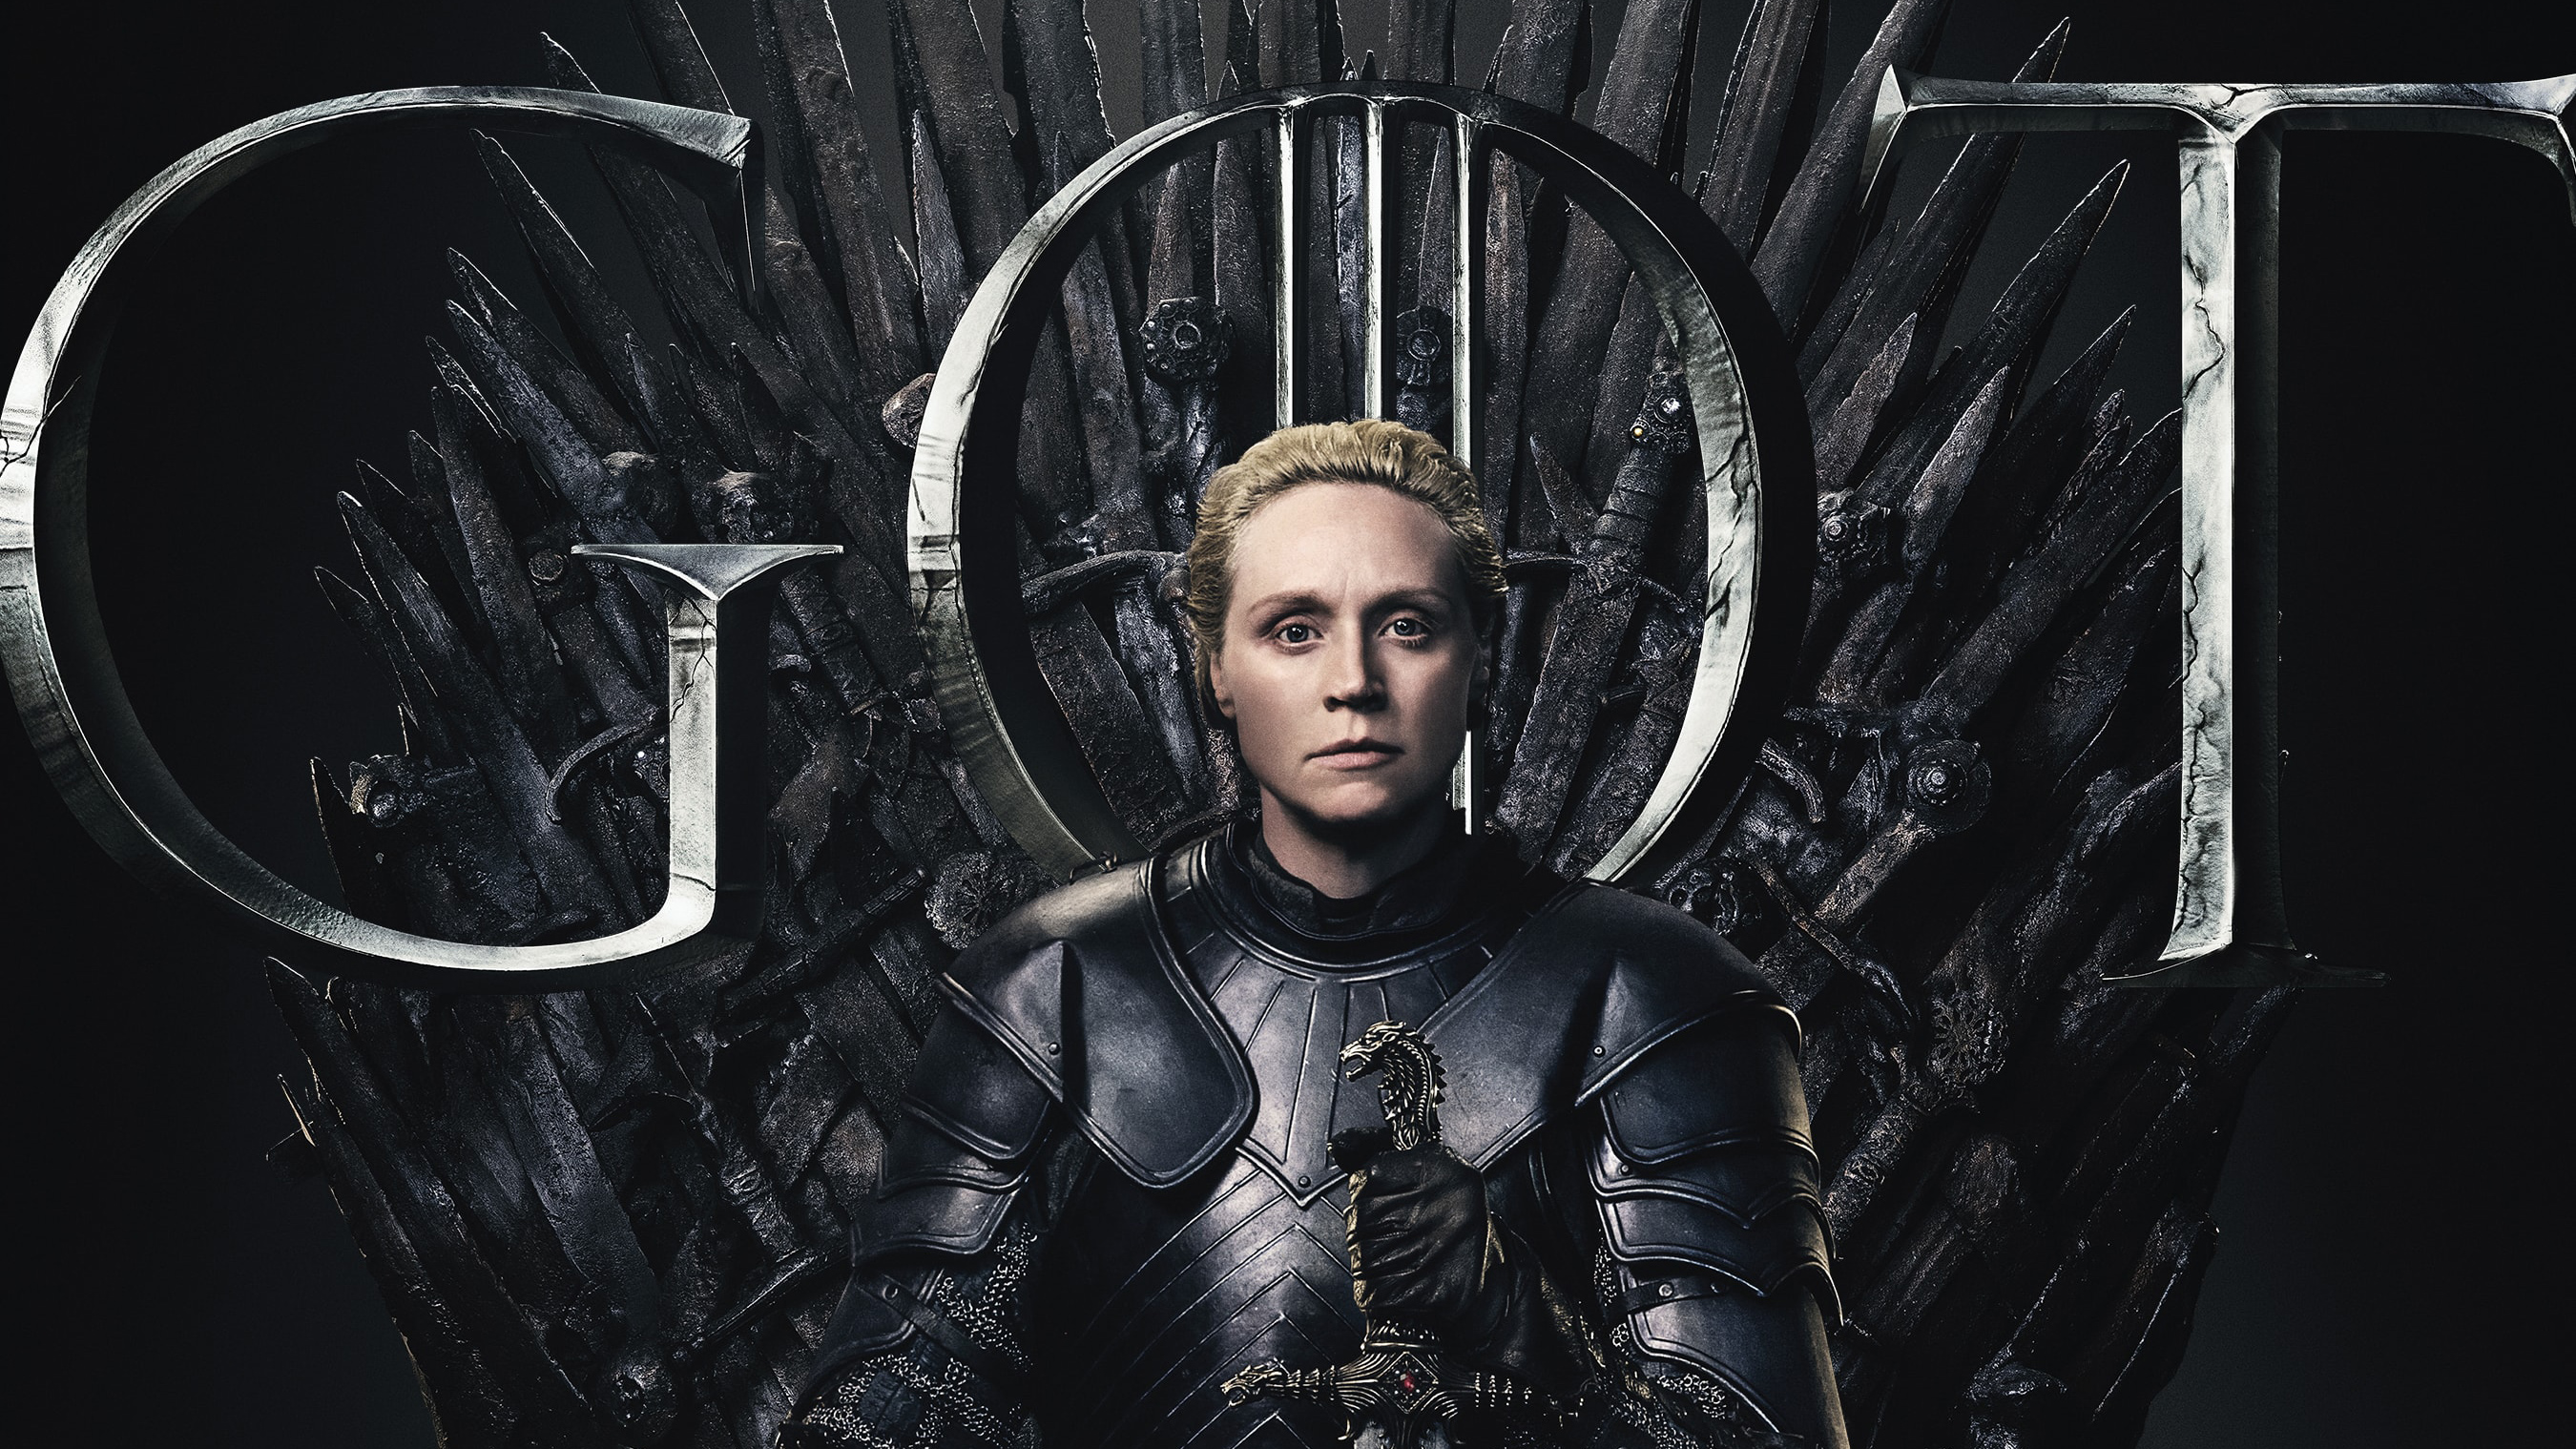 Wallpapers TV show brienne of tarth Game of Thrones season 8 on the desktop